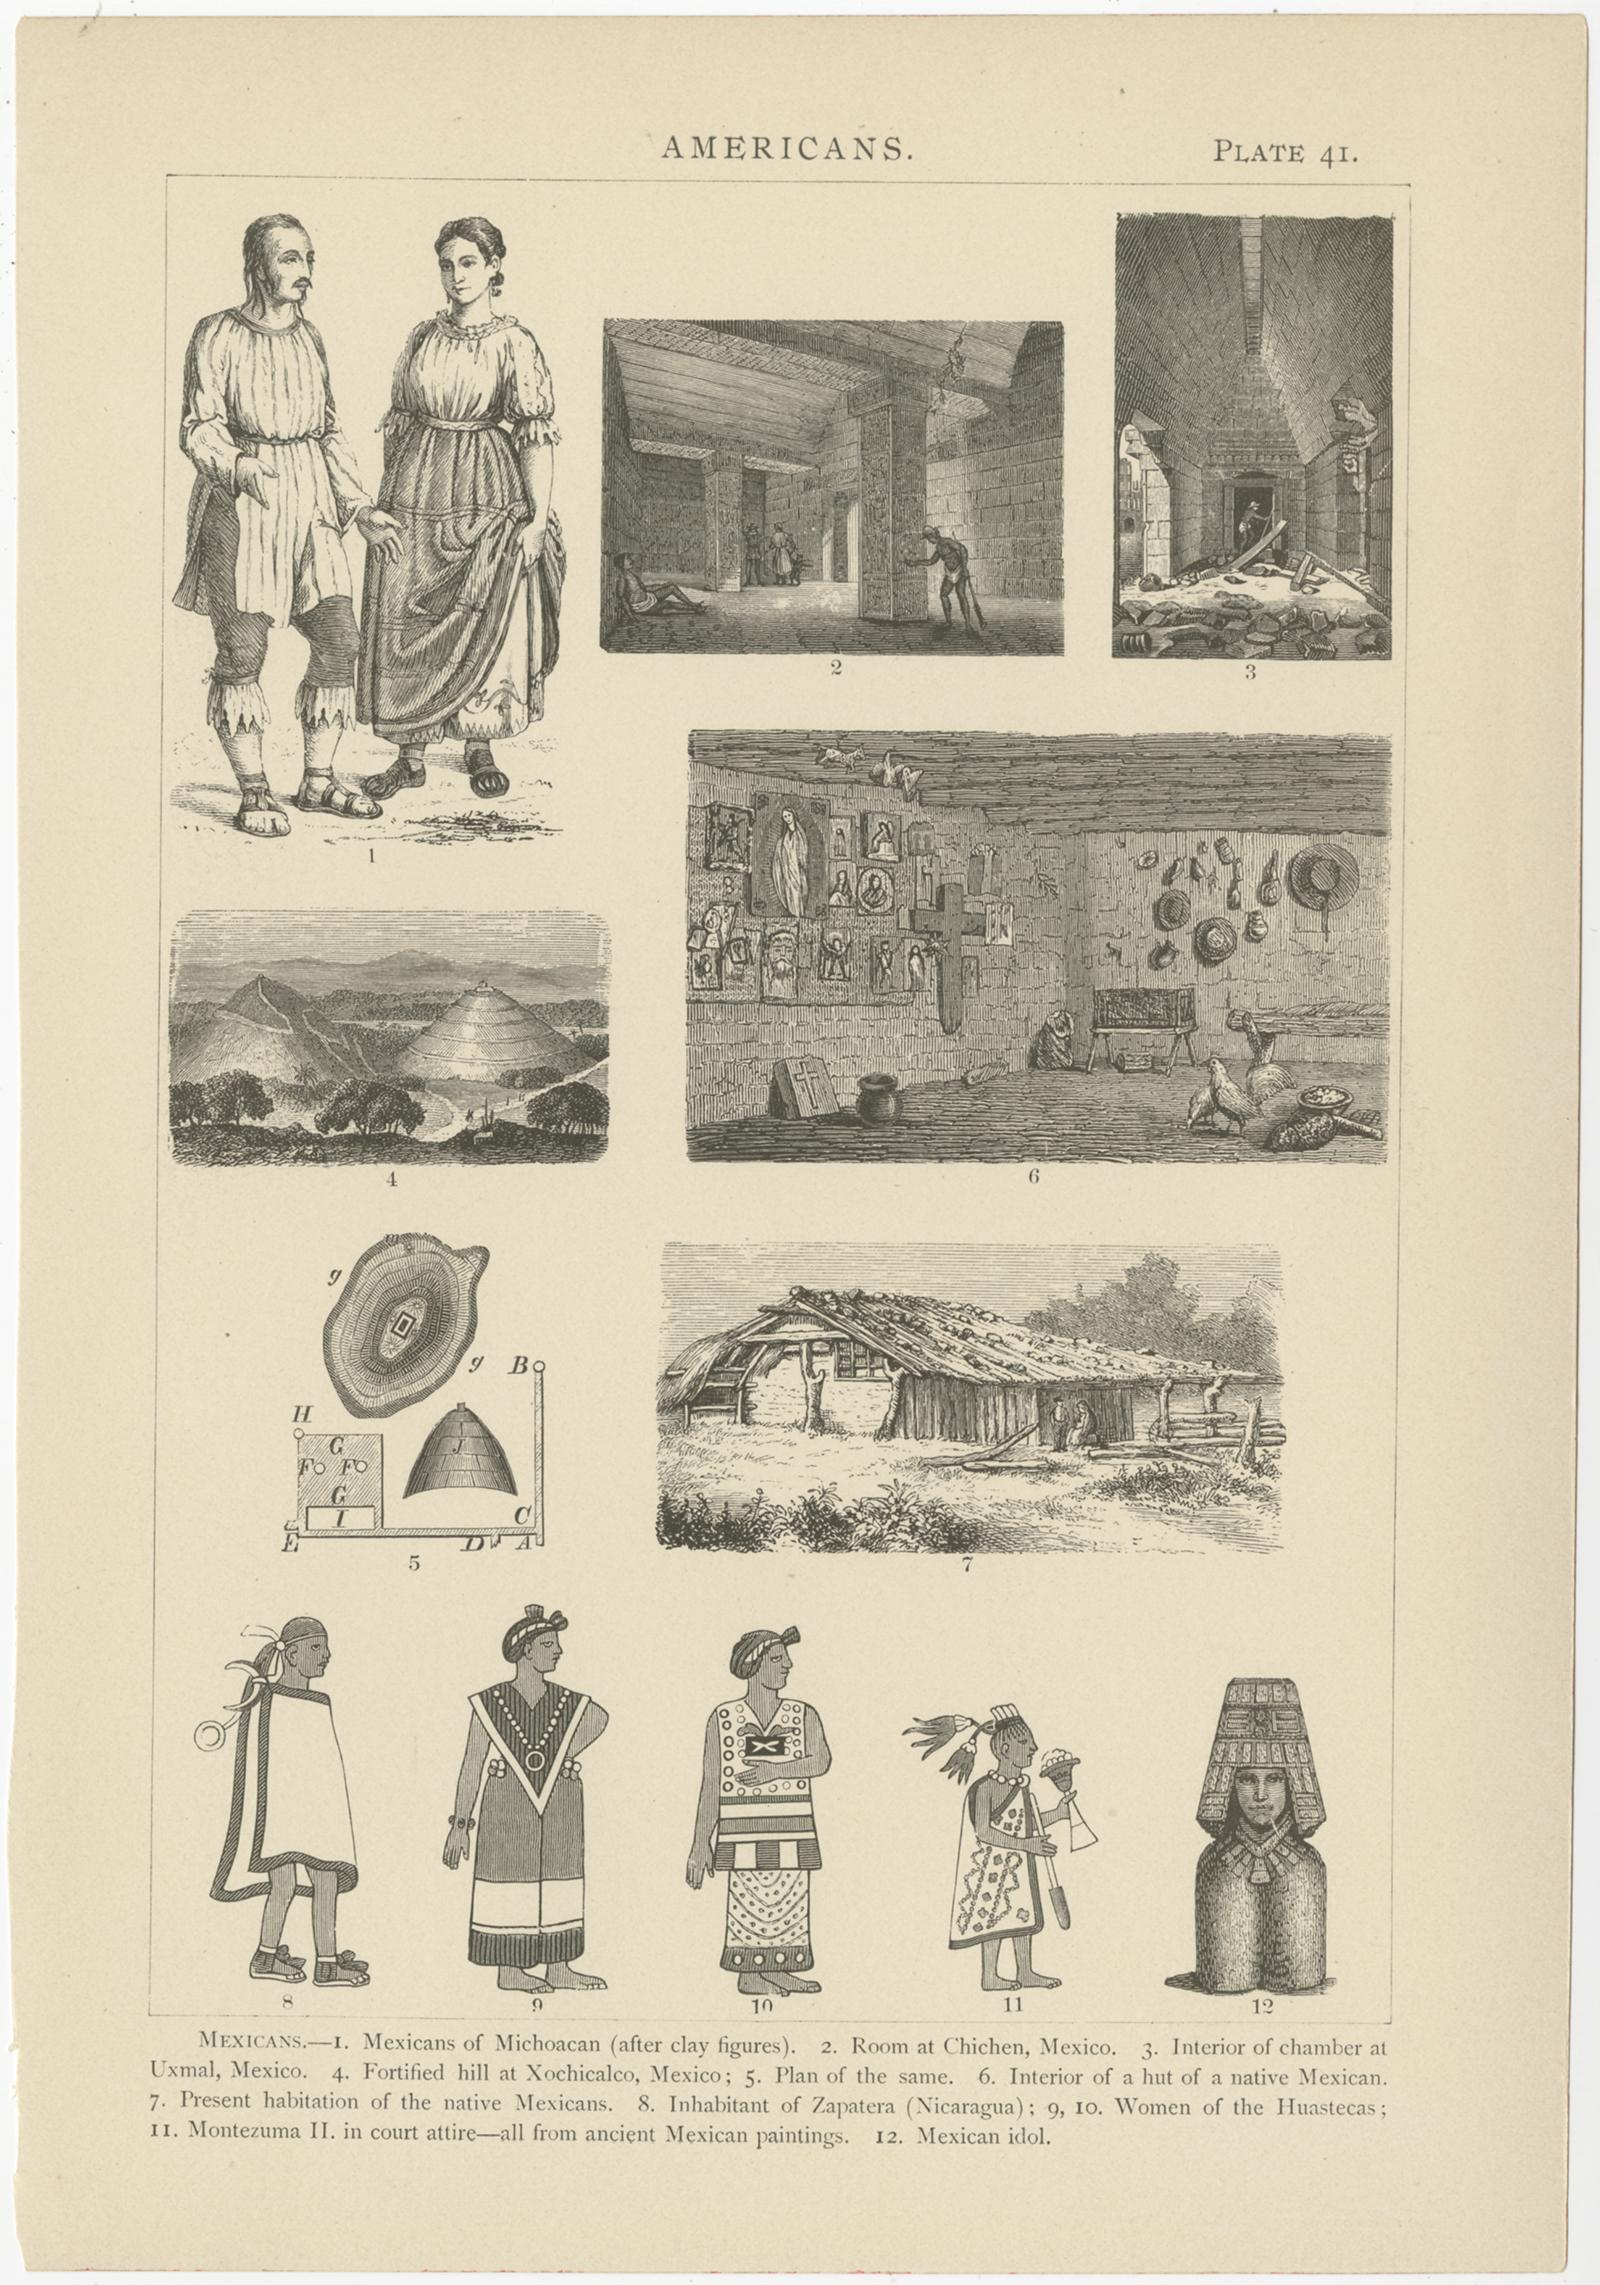 Set of four antique prints depicting various scenes, figures, and objects of Mexico. These prints originate from 'Iconographic Encyclopaedia of the Arts and Sciences' by Johann Heck and Daniel Brinton.